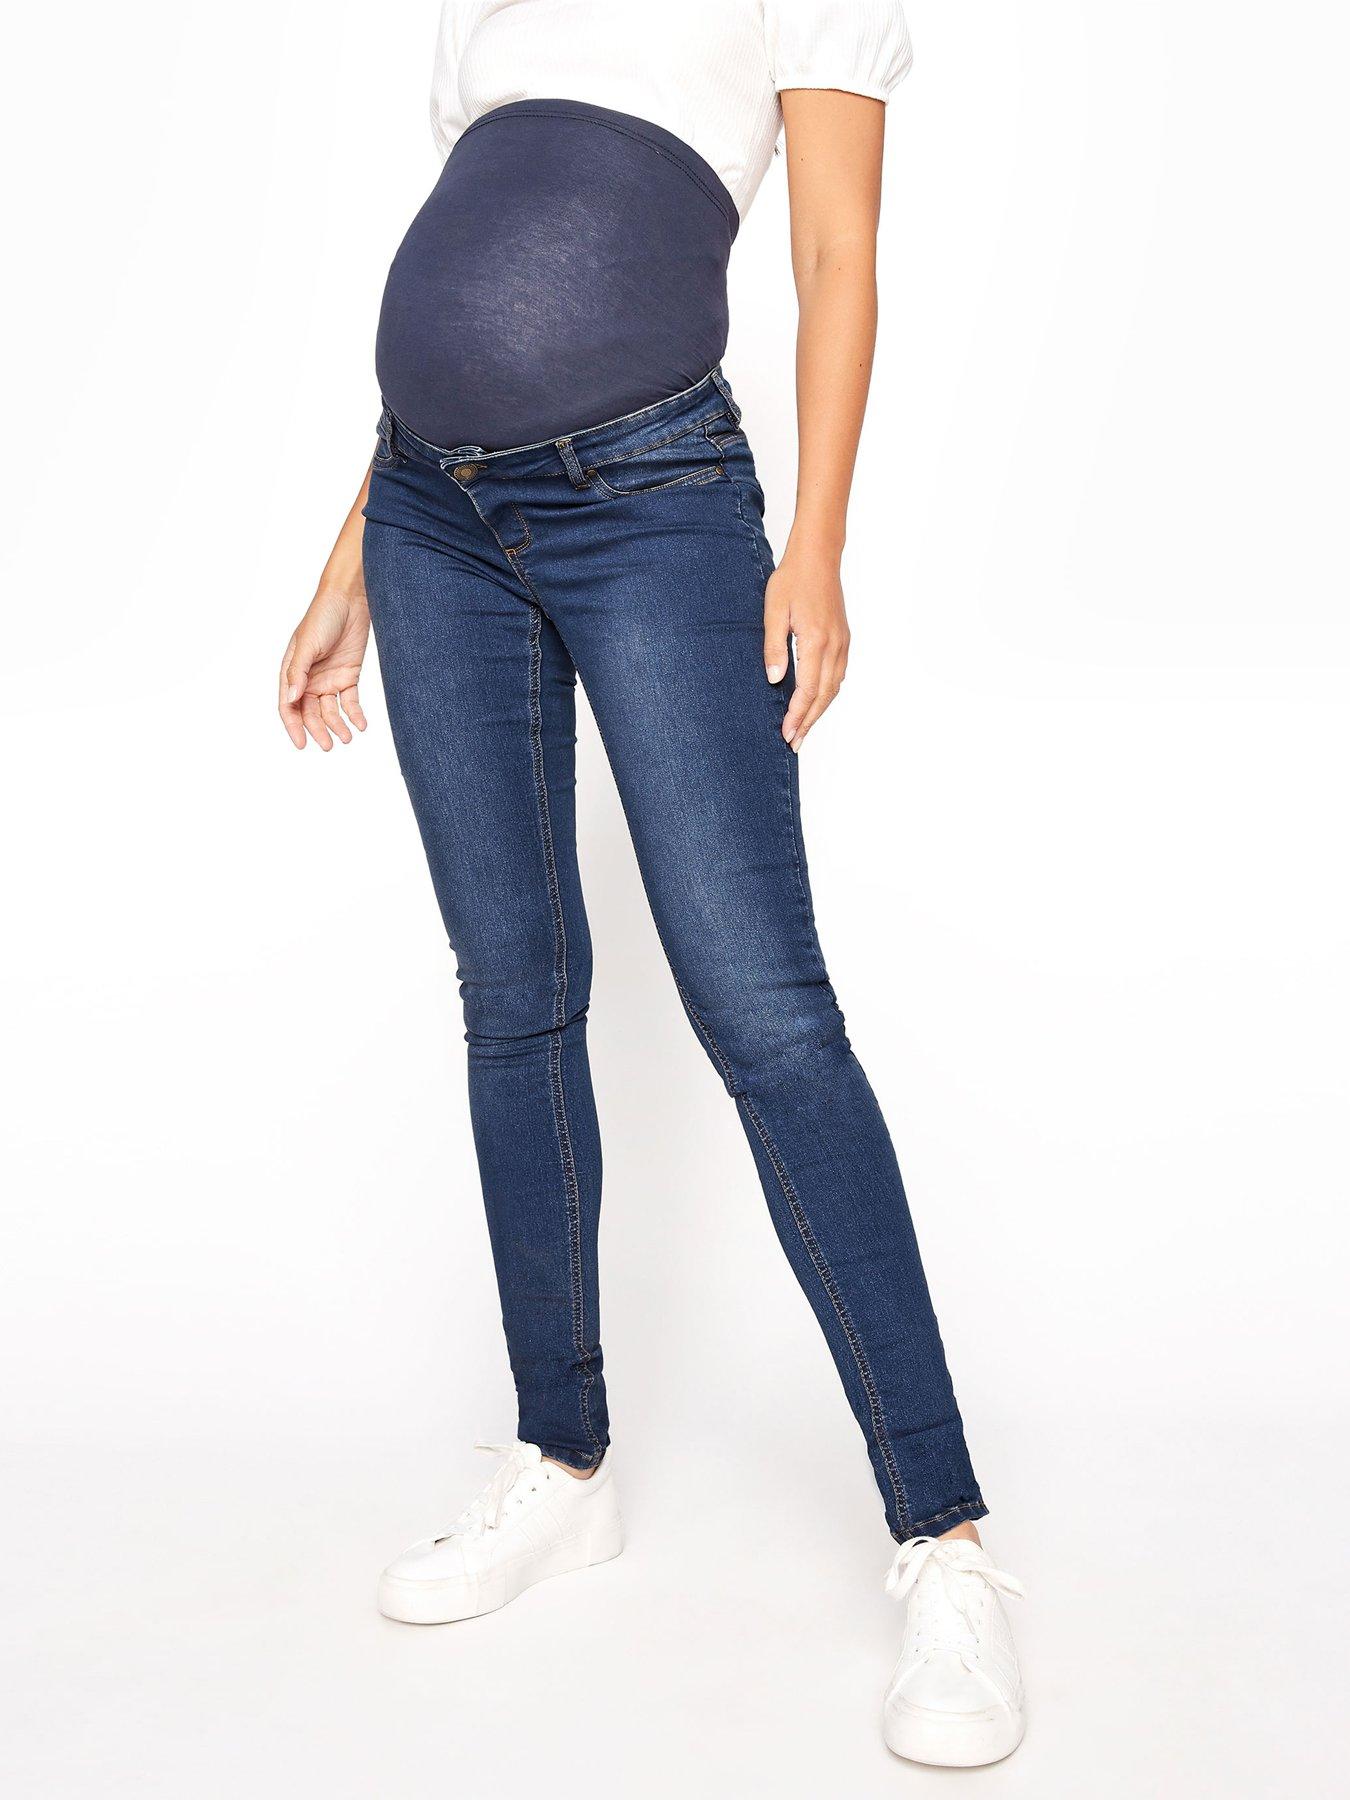 Jeans Maternity Skinny Jeans With Comfort Panel